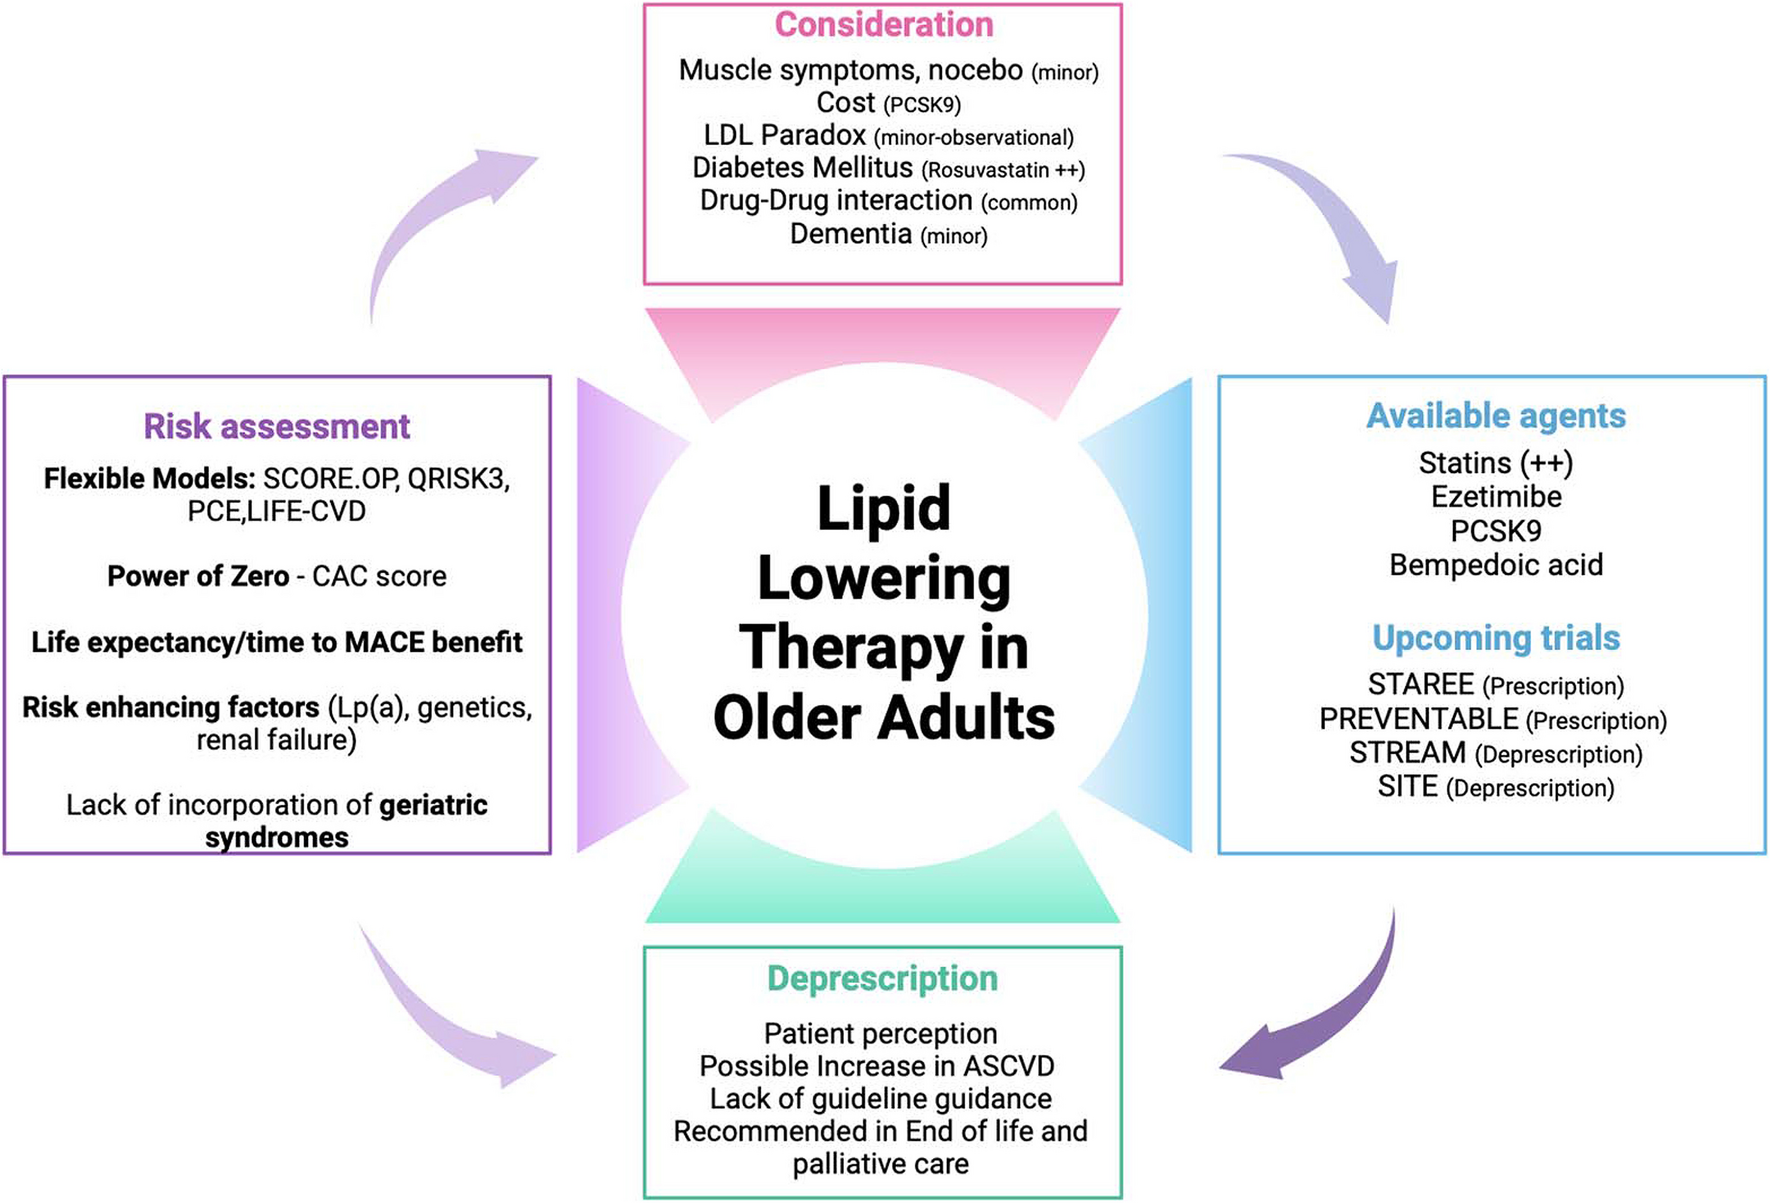 Cholesterol Lowering in Older Adults: Should We Wait for Further Evidence?